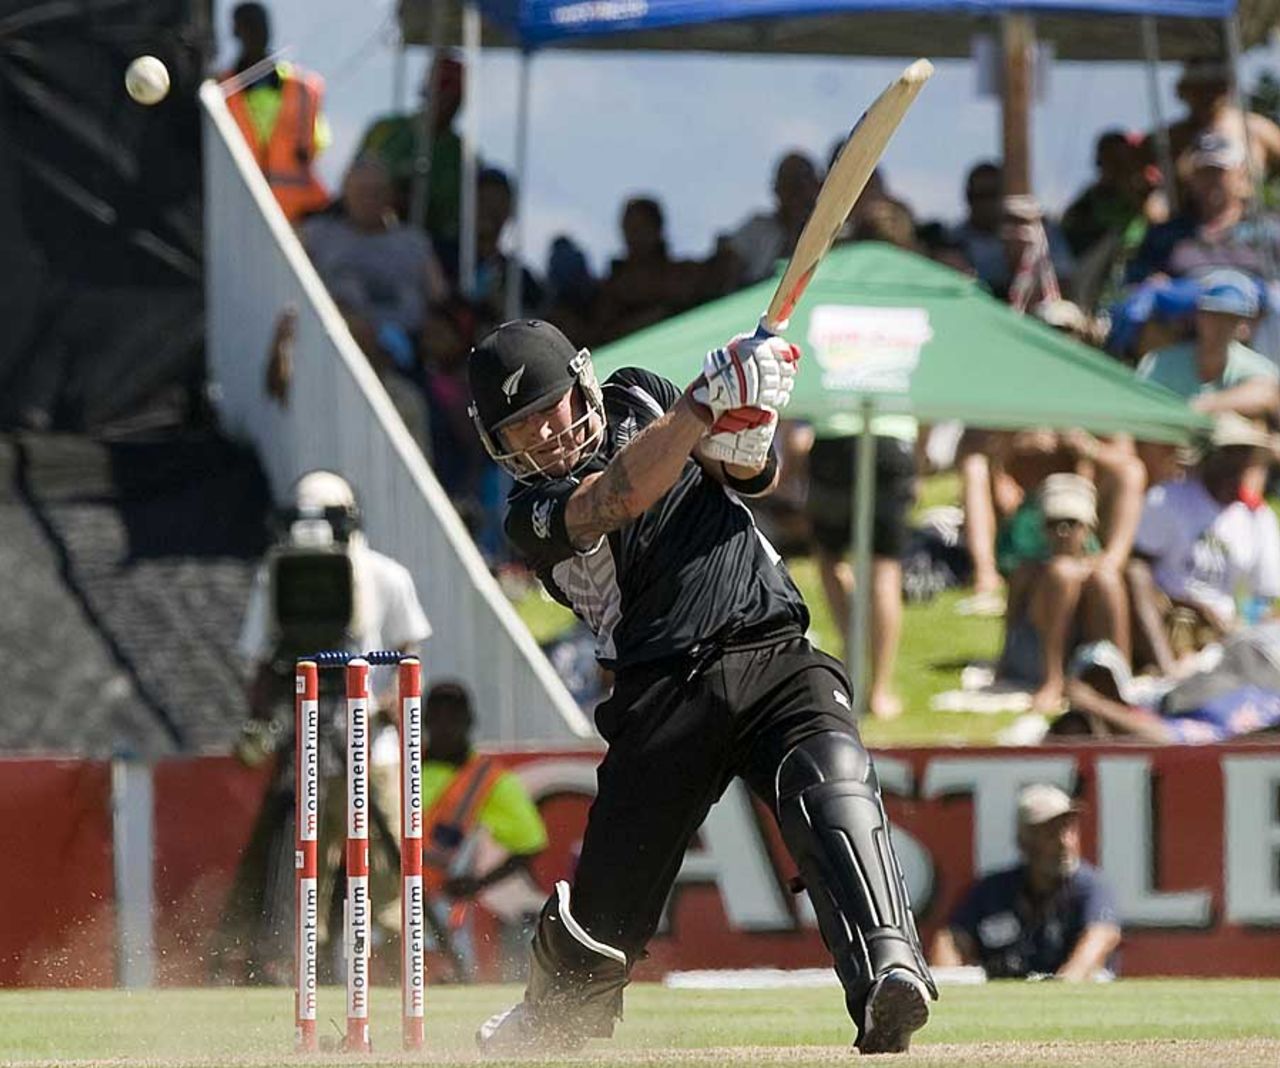 Brendon McCullum smashes one, South Africa v New Zealand, 1st ODI, Paarl, January 19, 2013